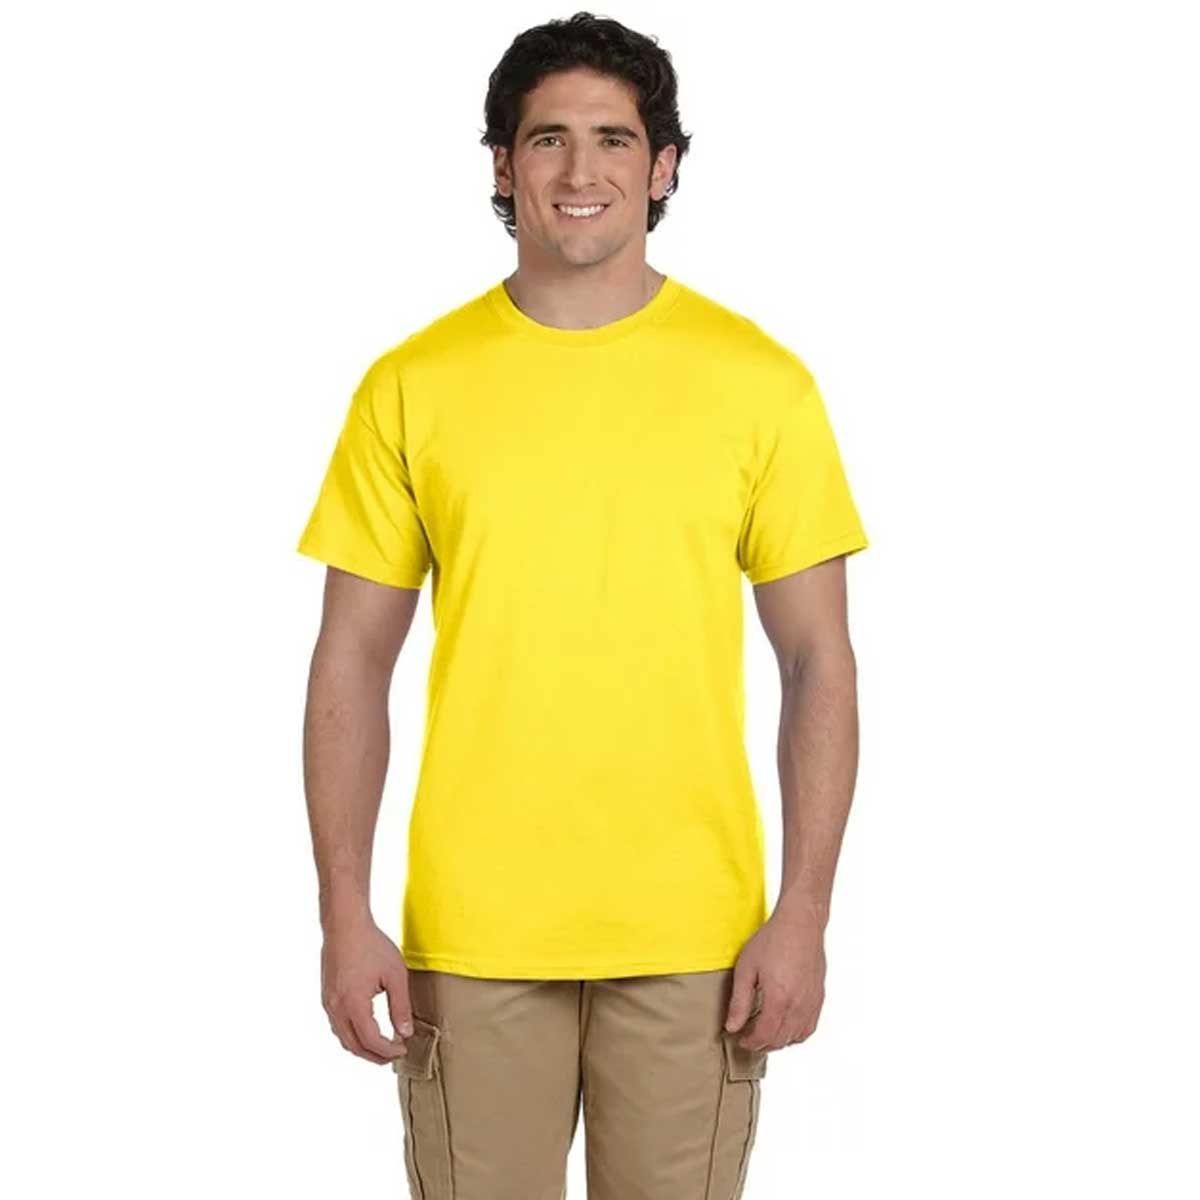 Promotional T Shirts Manufacturers in Honduras